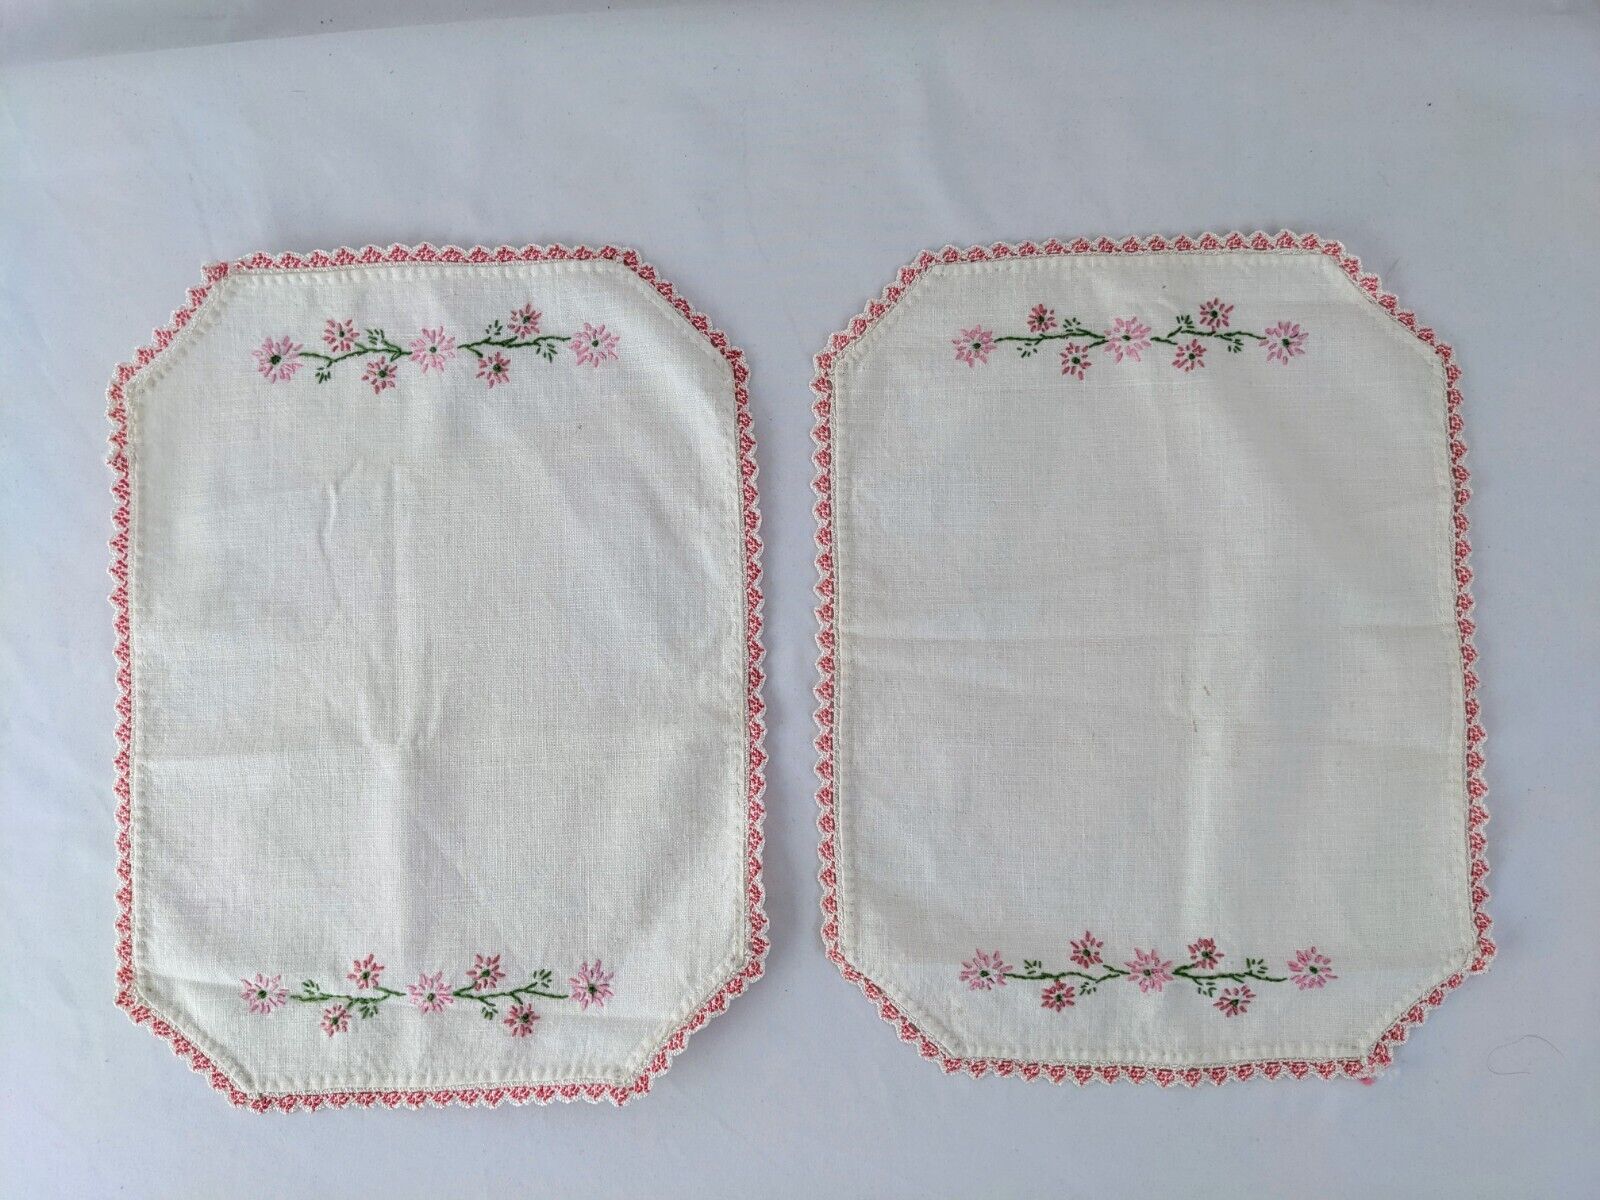 VTG Pair Dresser Table Scarves Hand Embroidered Pink Flowers Lace Cottagecore 